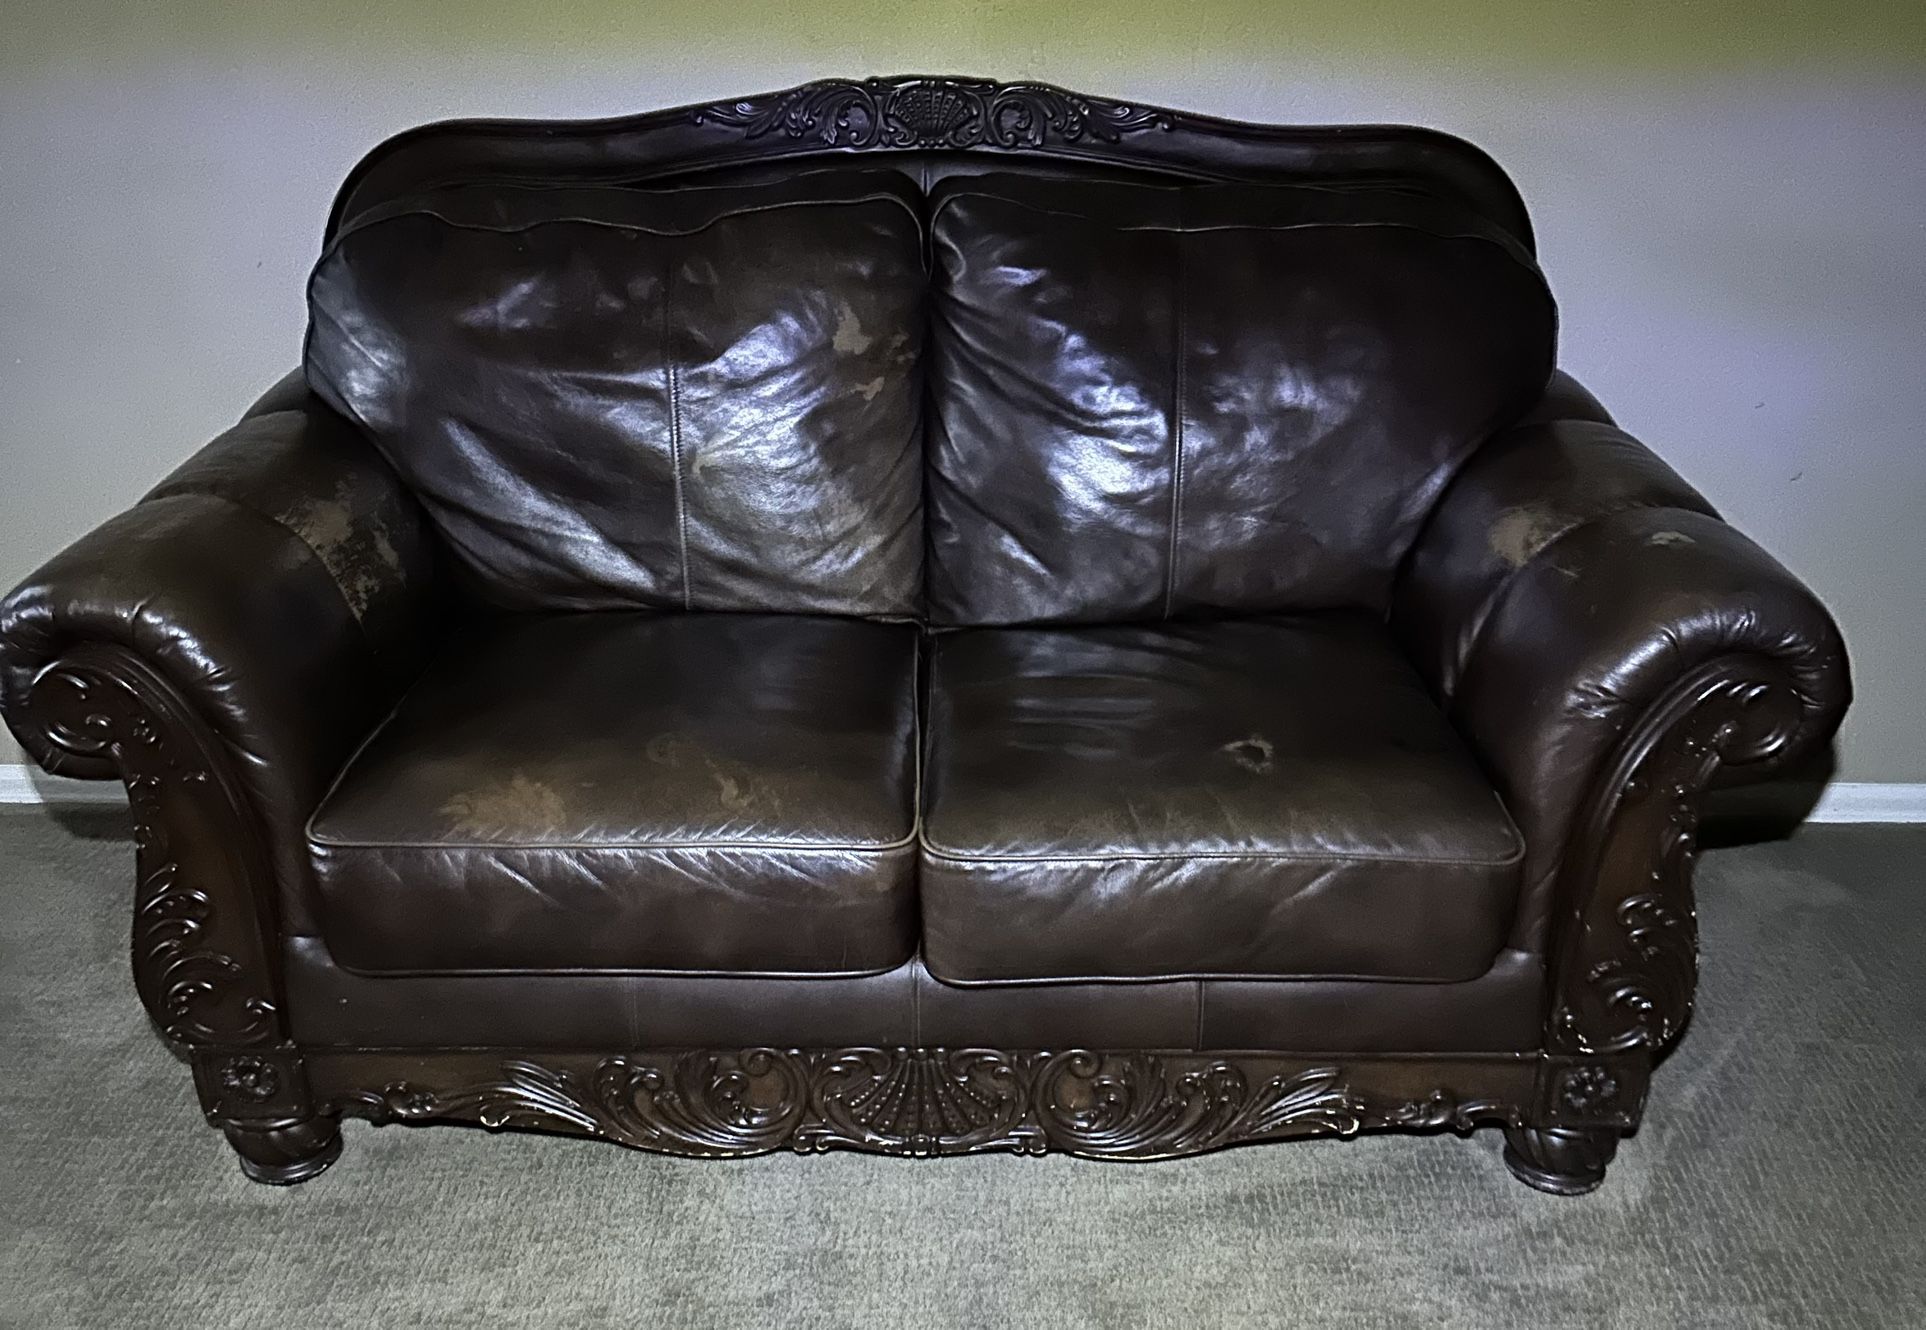 COUCHES FOR SALE